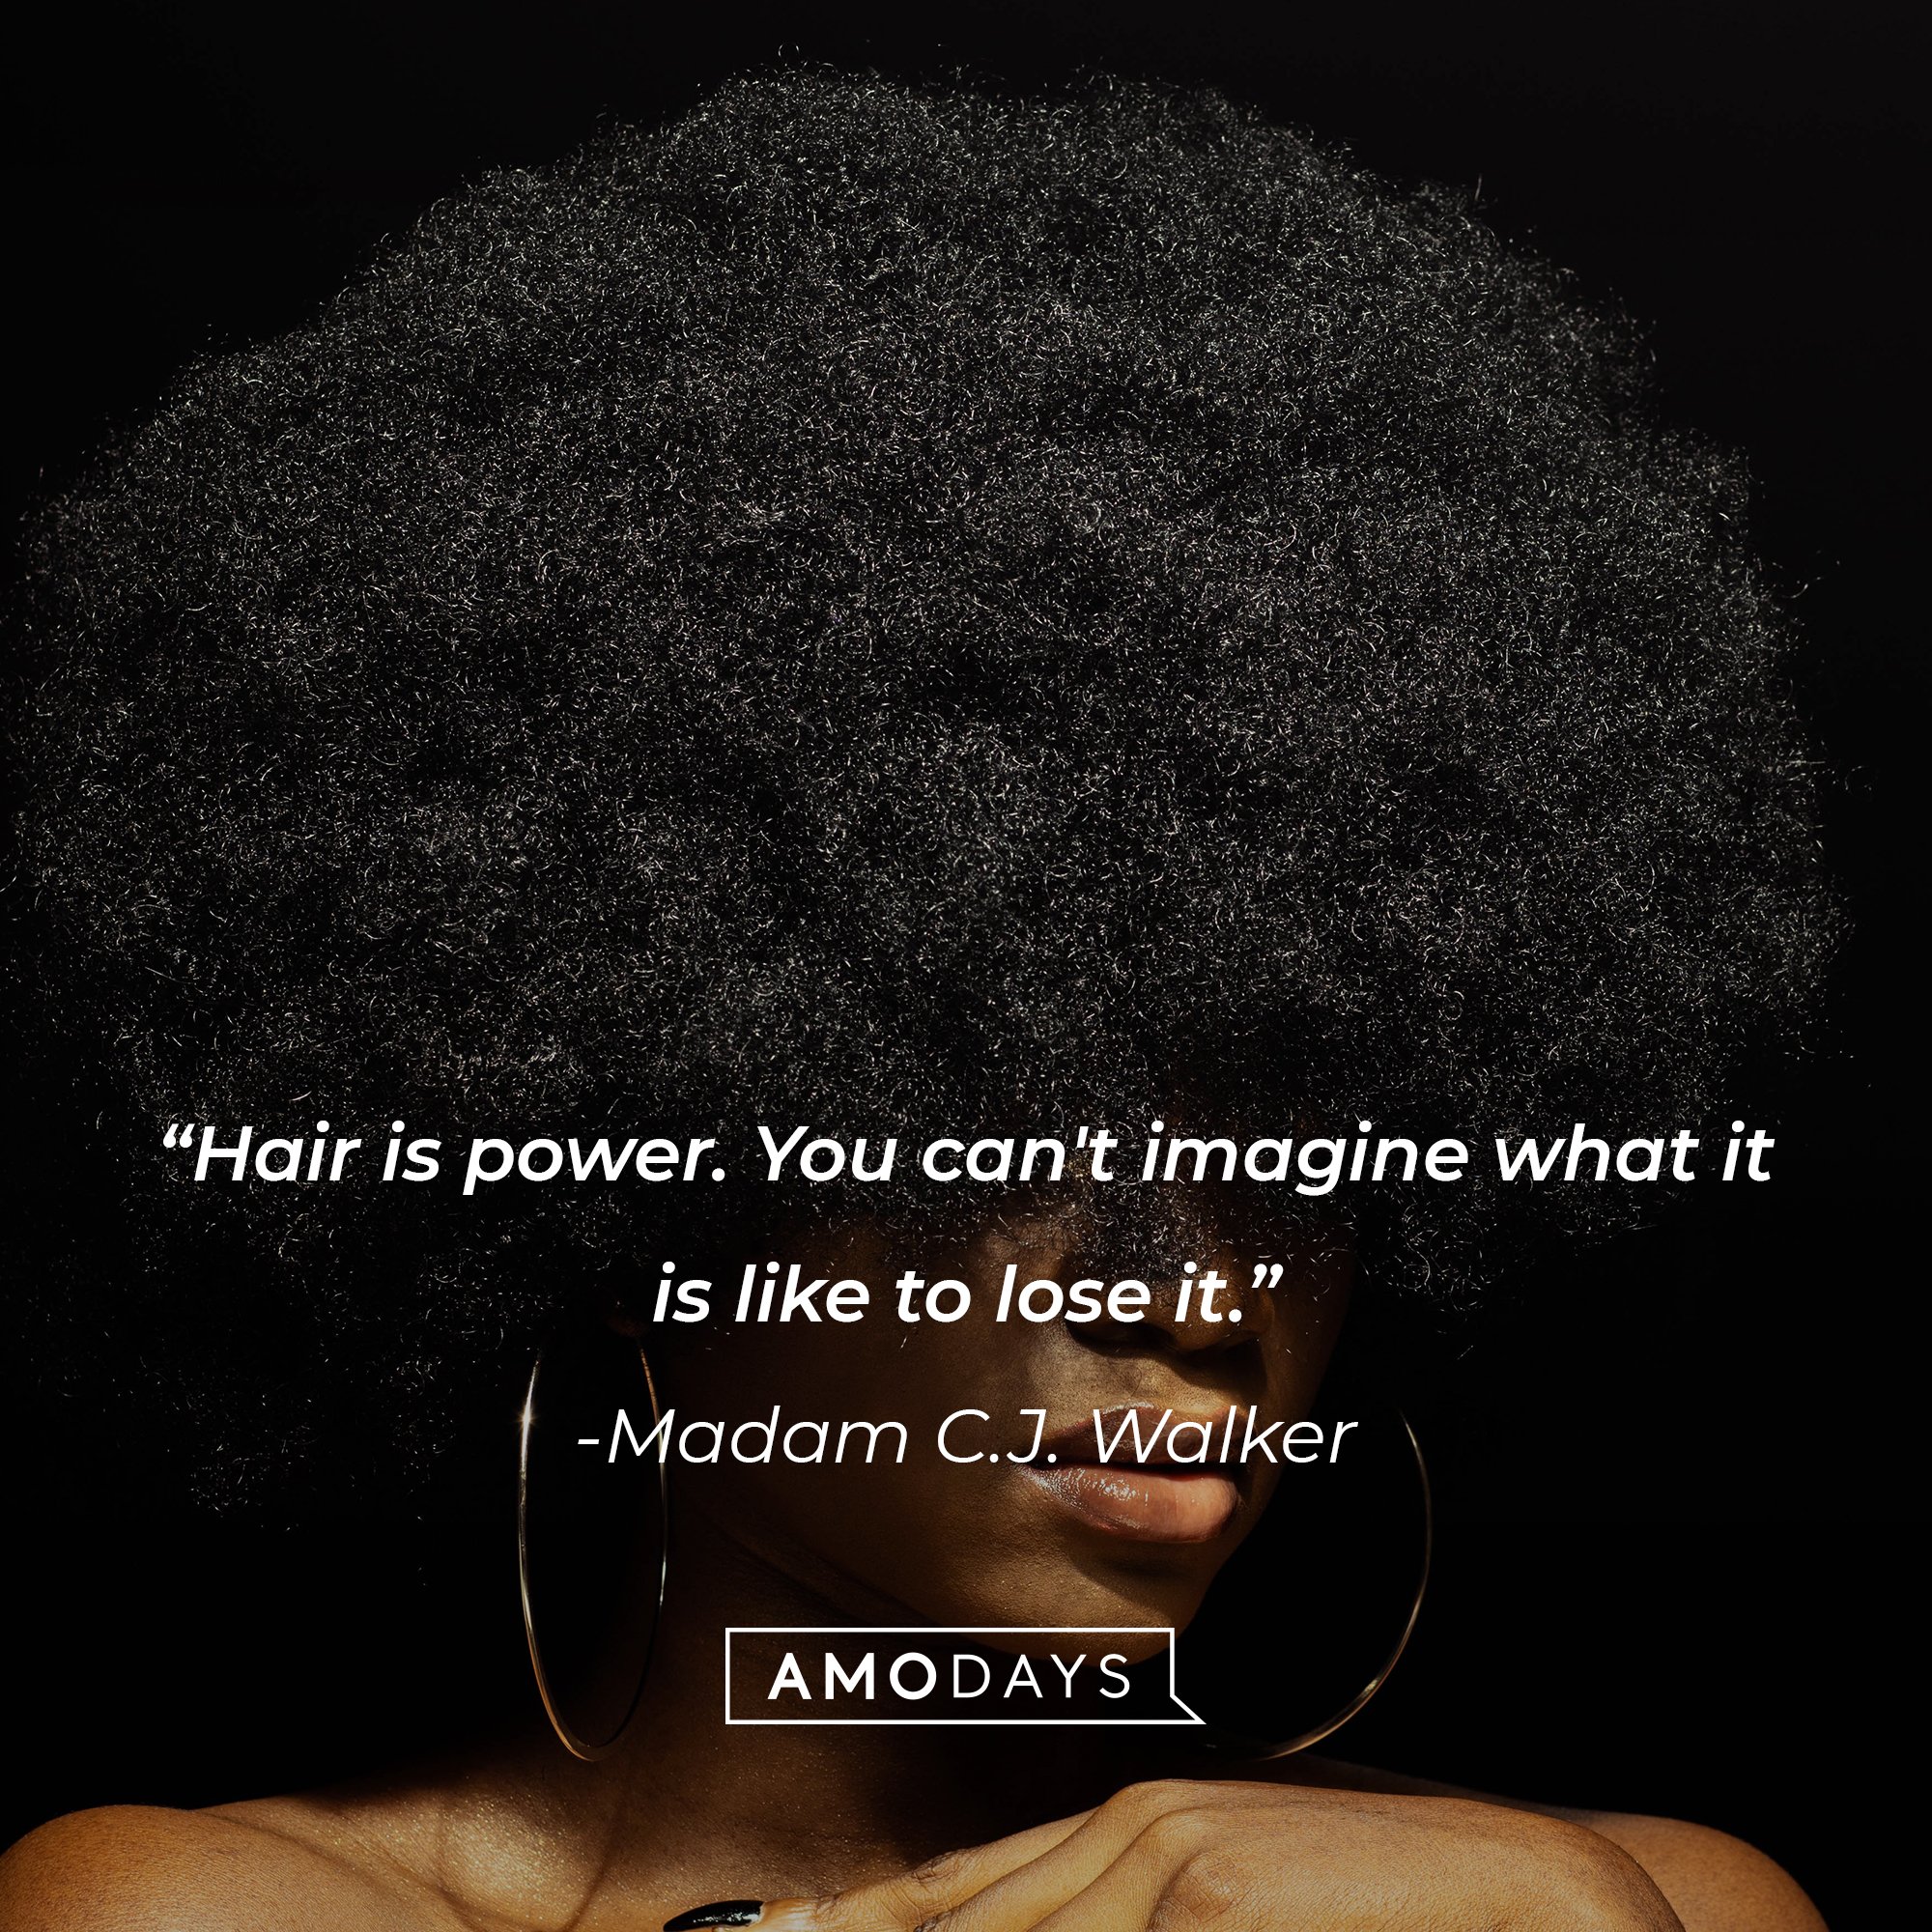 Madam C.J. Walker's quote: "Hair is power. You can't imagine what it is like to lose it." | Image: AmoDays